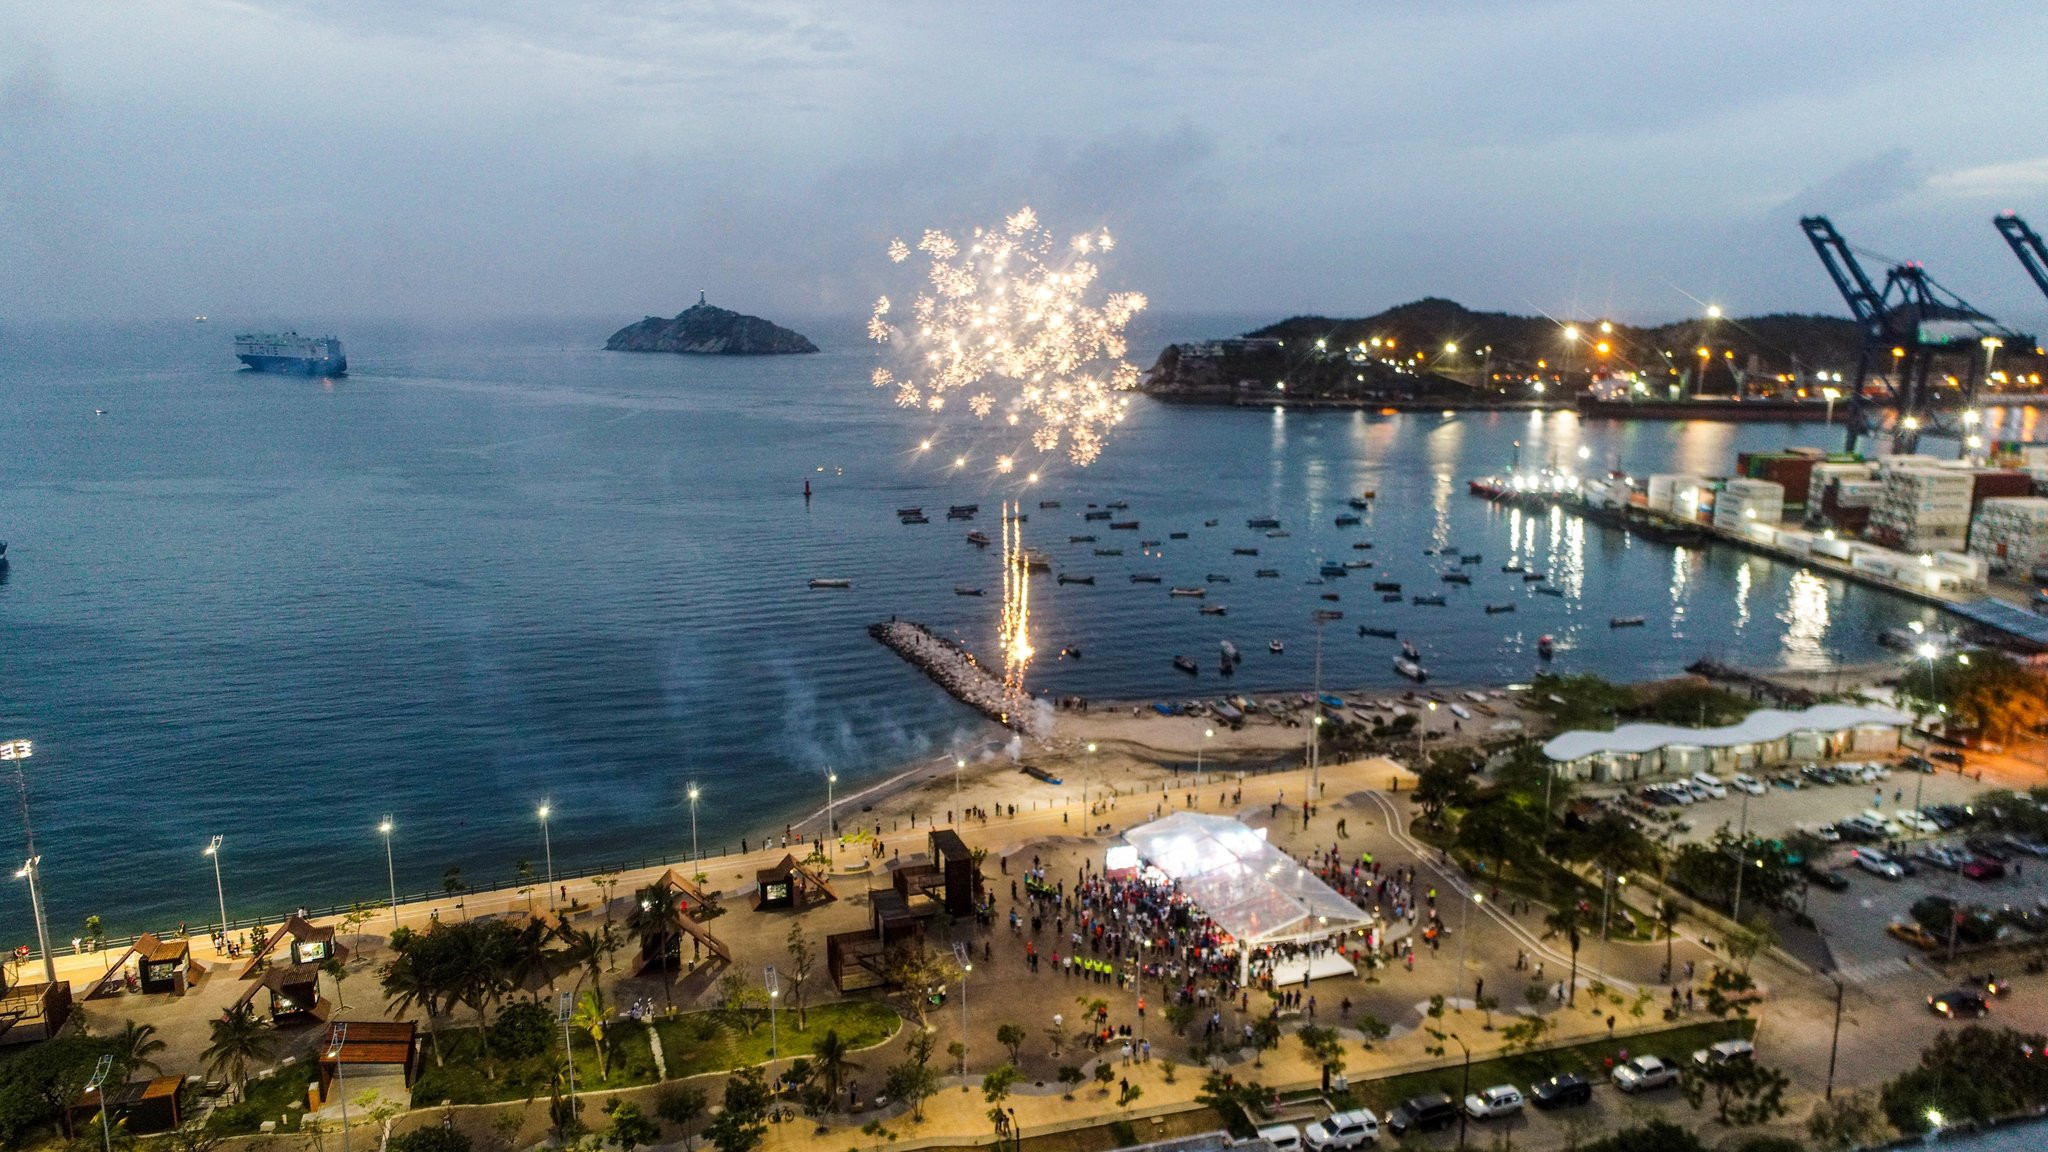 Quota places for the Santiago 2023 Pan American Games will be on offer in sailing events at this month's inaugural Central American and Caribbean Games of Sea and Beach at Santa Marta on the Atlantic coast of Colombia ©Santiago 2023